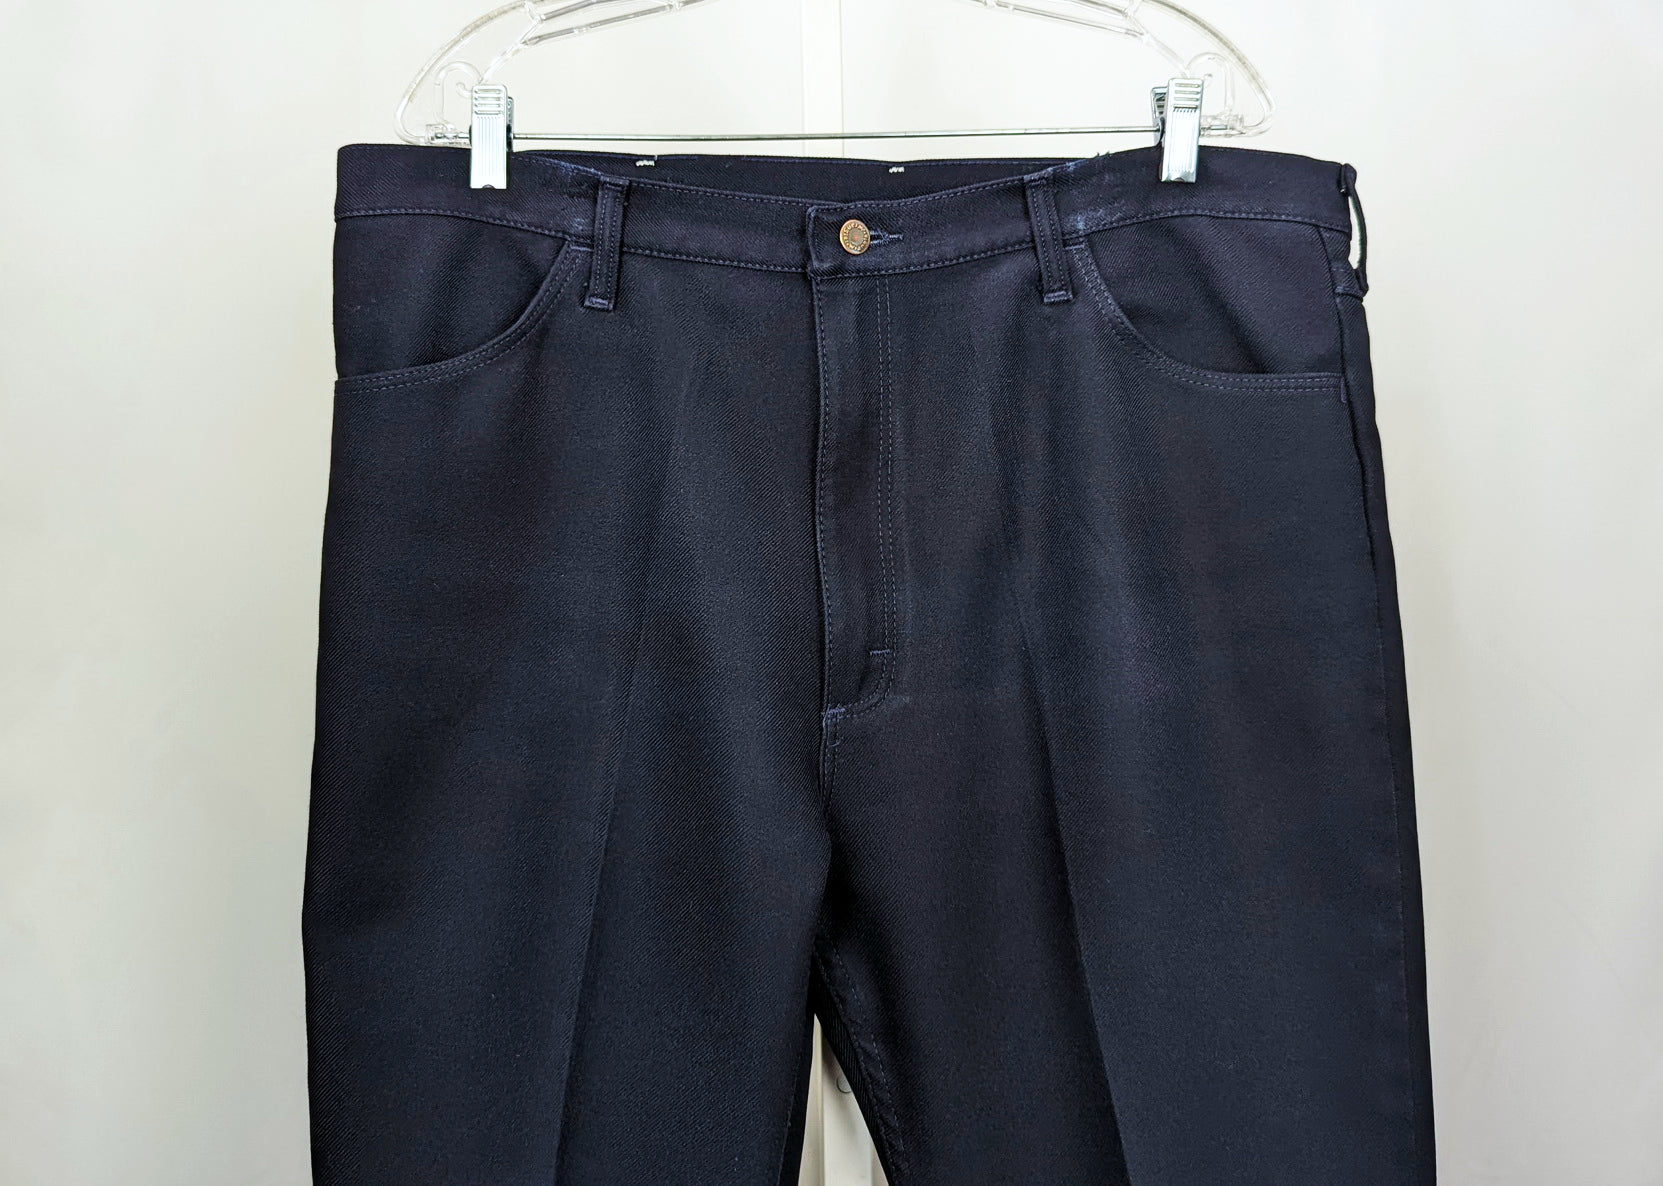 Vintage 70s Navy Blue Polyester Pants By Wrangler | Shop THRILLING